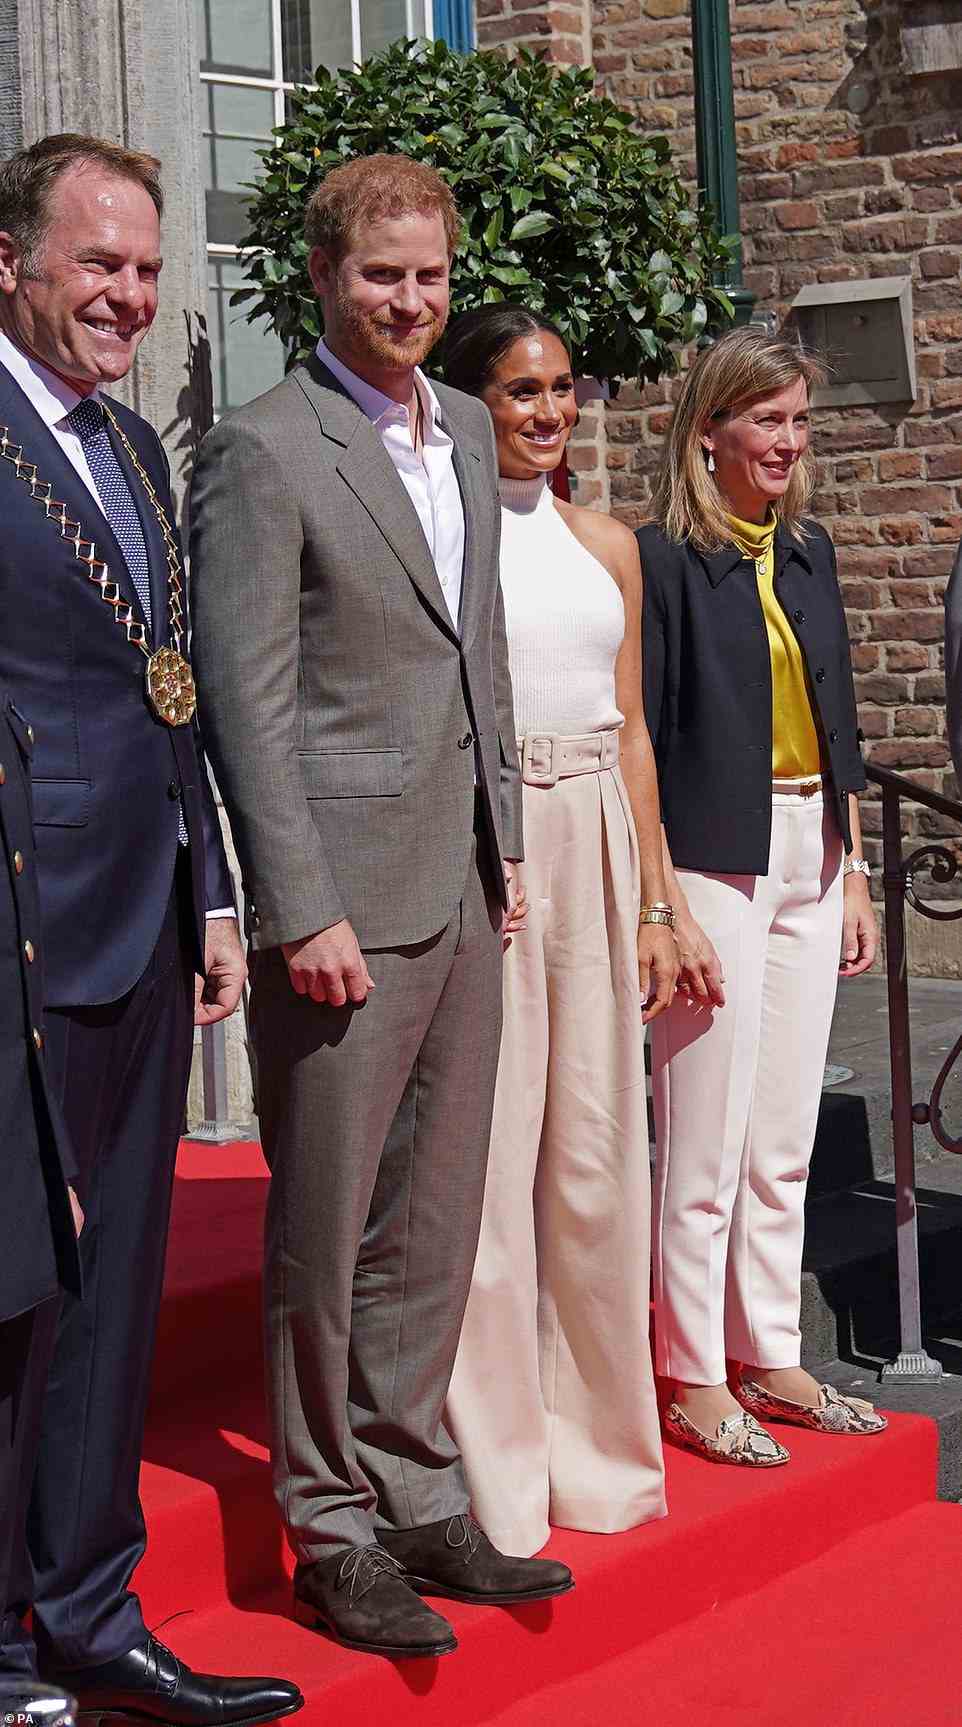 Harry and Meghan held hands as they posed for photos on the steps outside City Hall, looking delighted to be at the Invictus Games event